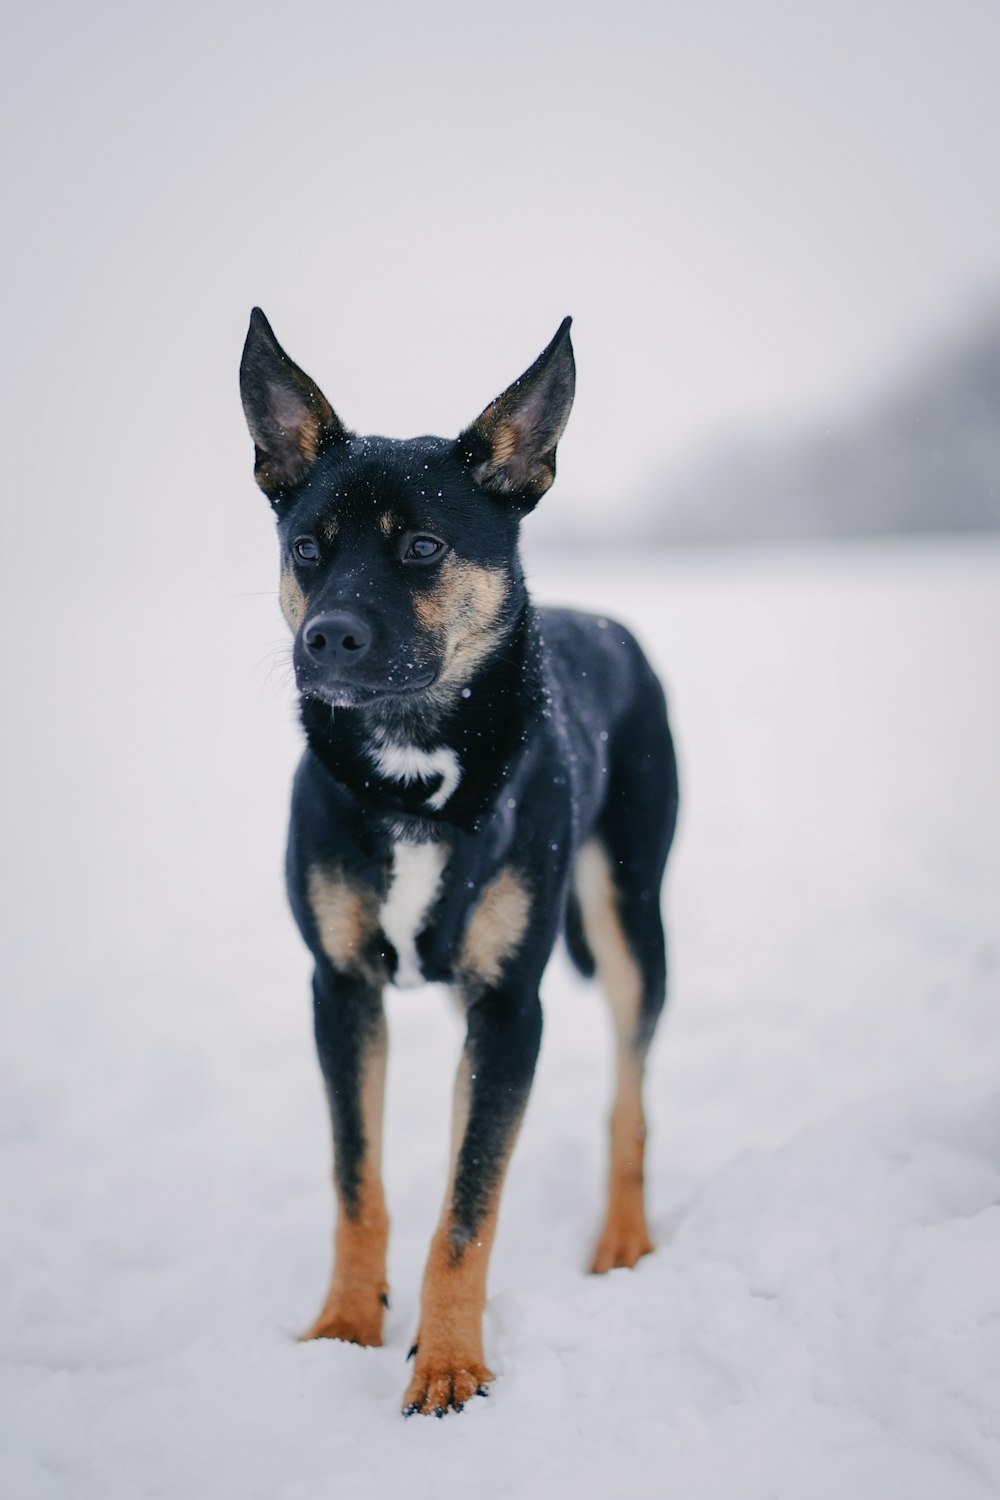 black and tan short coat small dog on snow covered ground